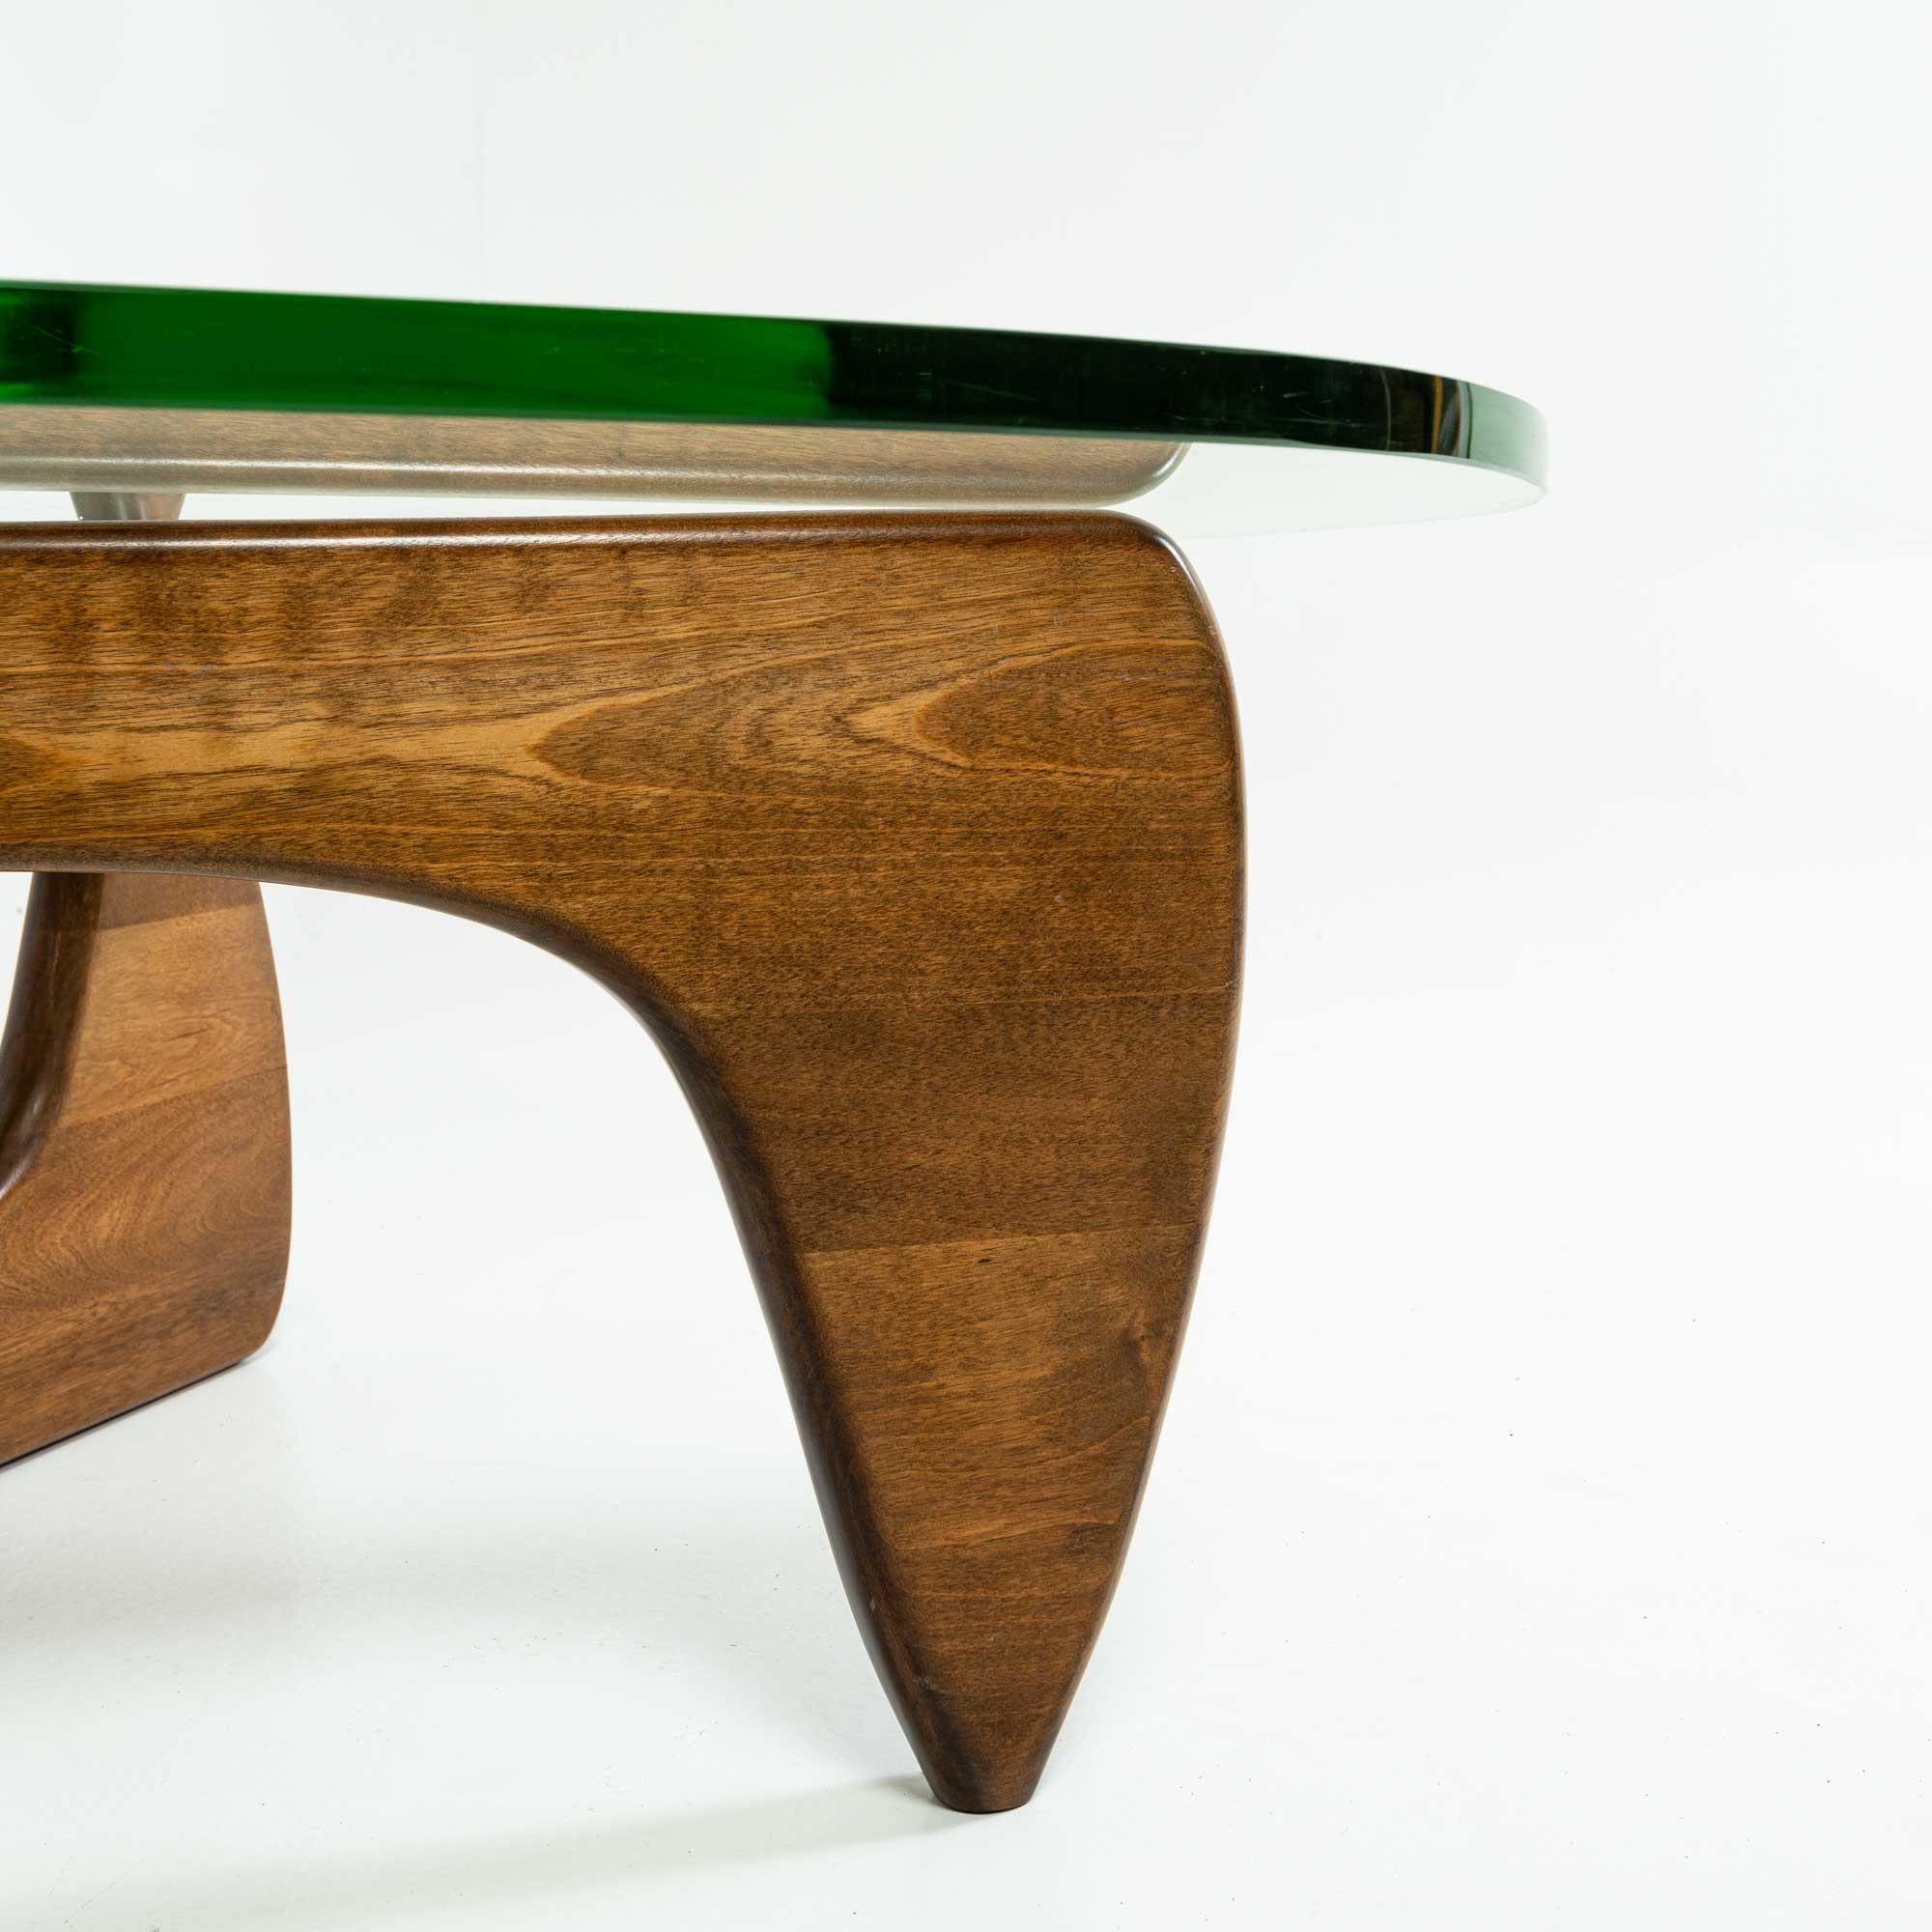 North American Early Noguchi Table by Isamu Noguchi for Herman Miller Green Glass